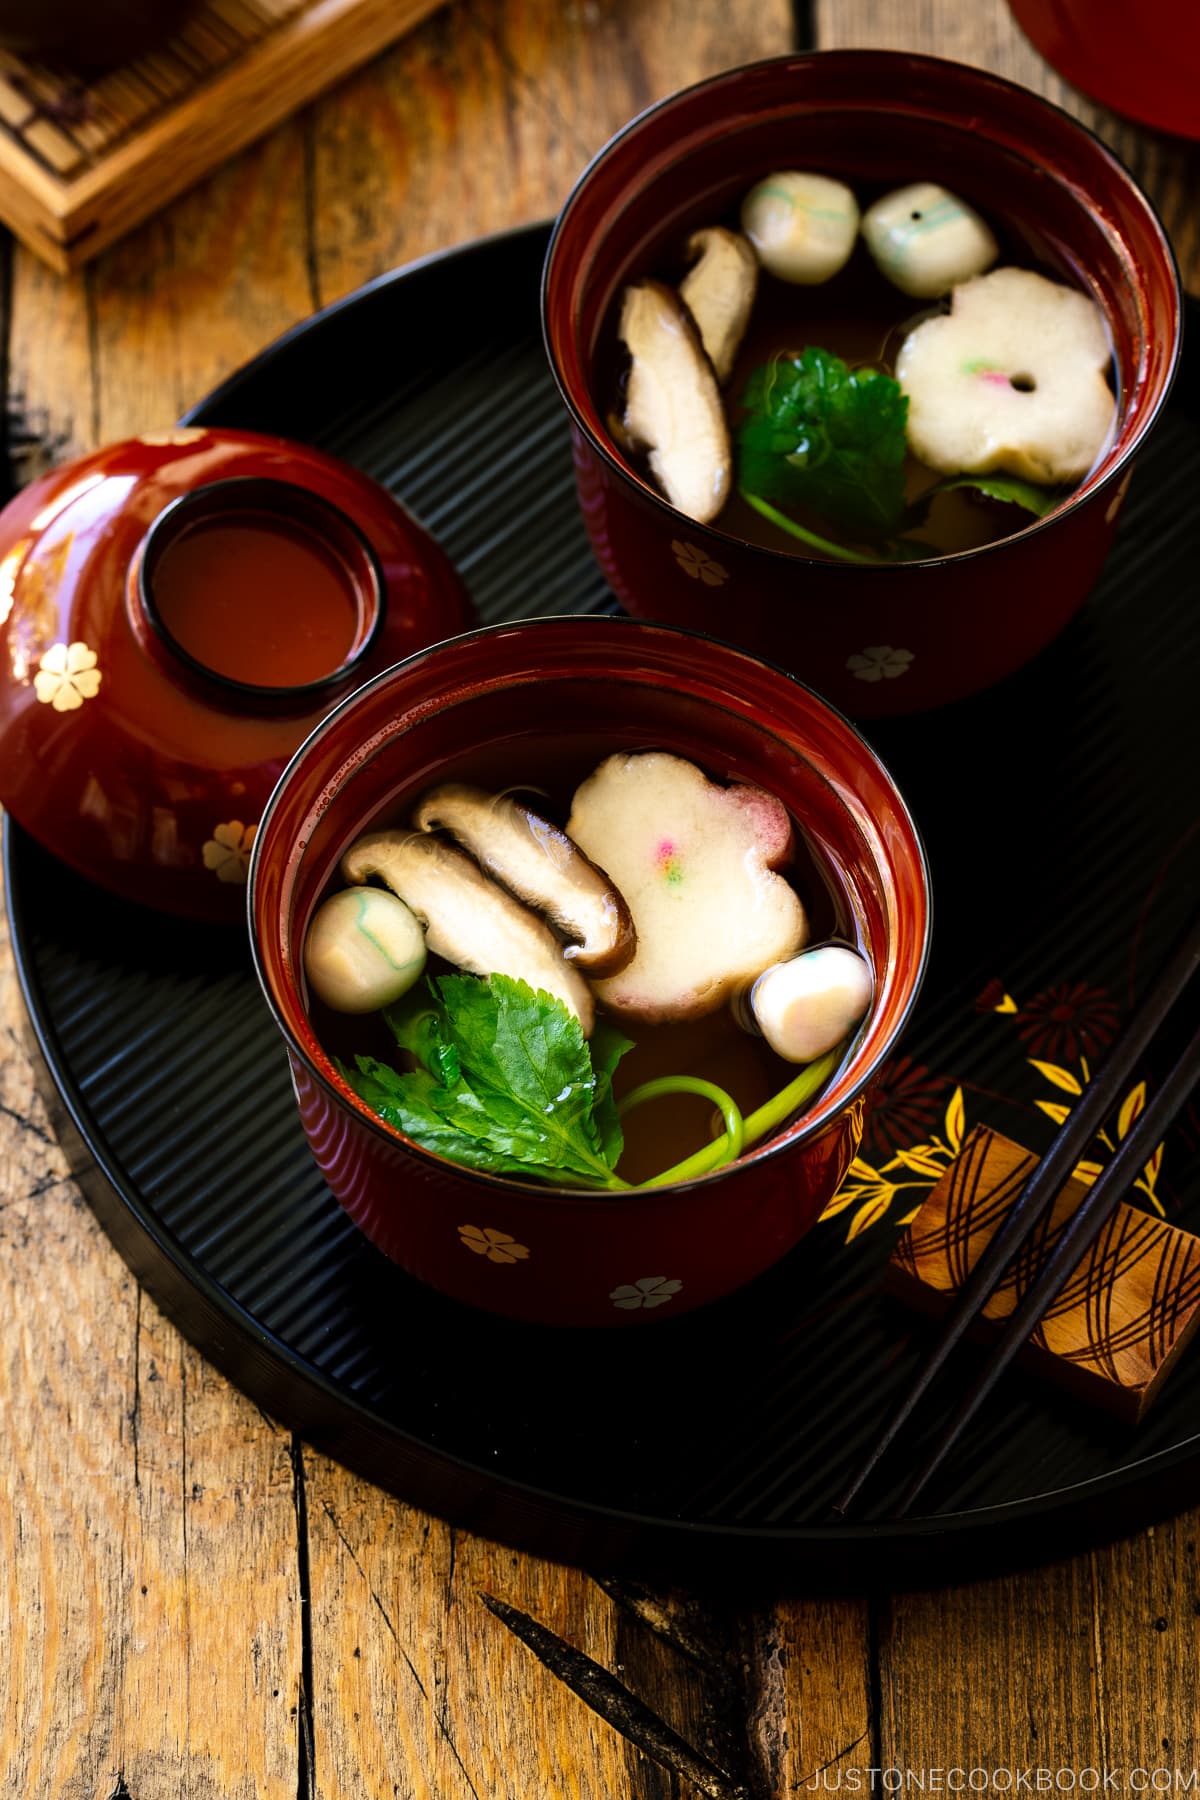 Red Japanese lacquered bowls containing clear soup (Osumashi) with shiitake mushrooms, fu, and mitsuba leaf.